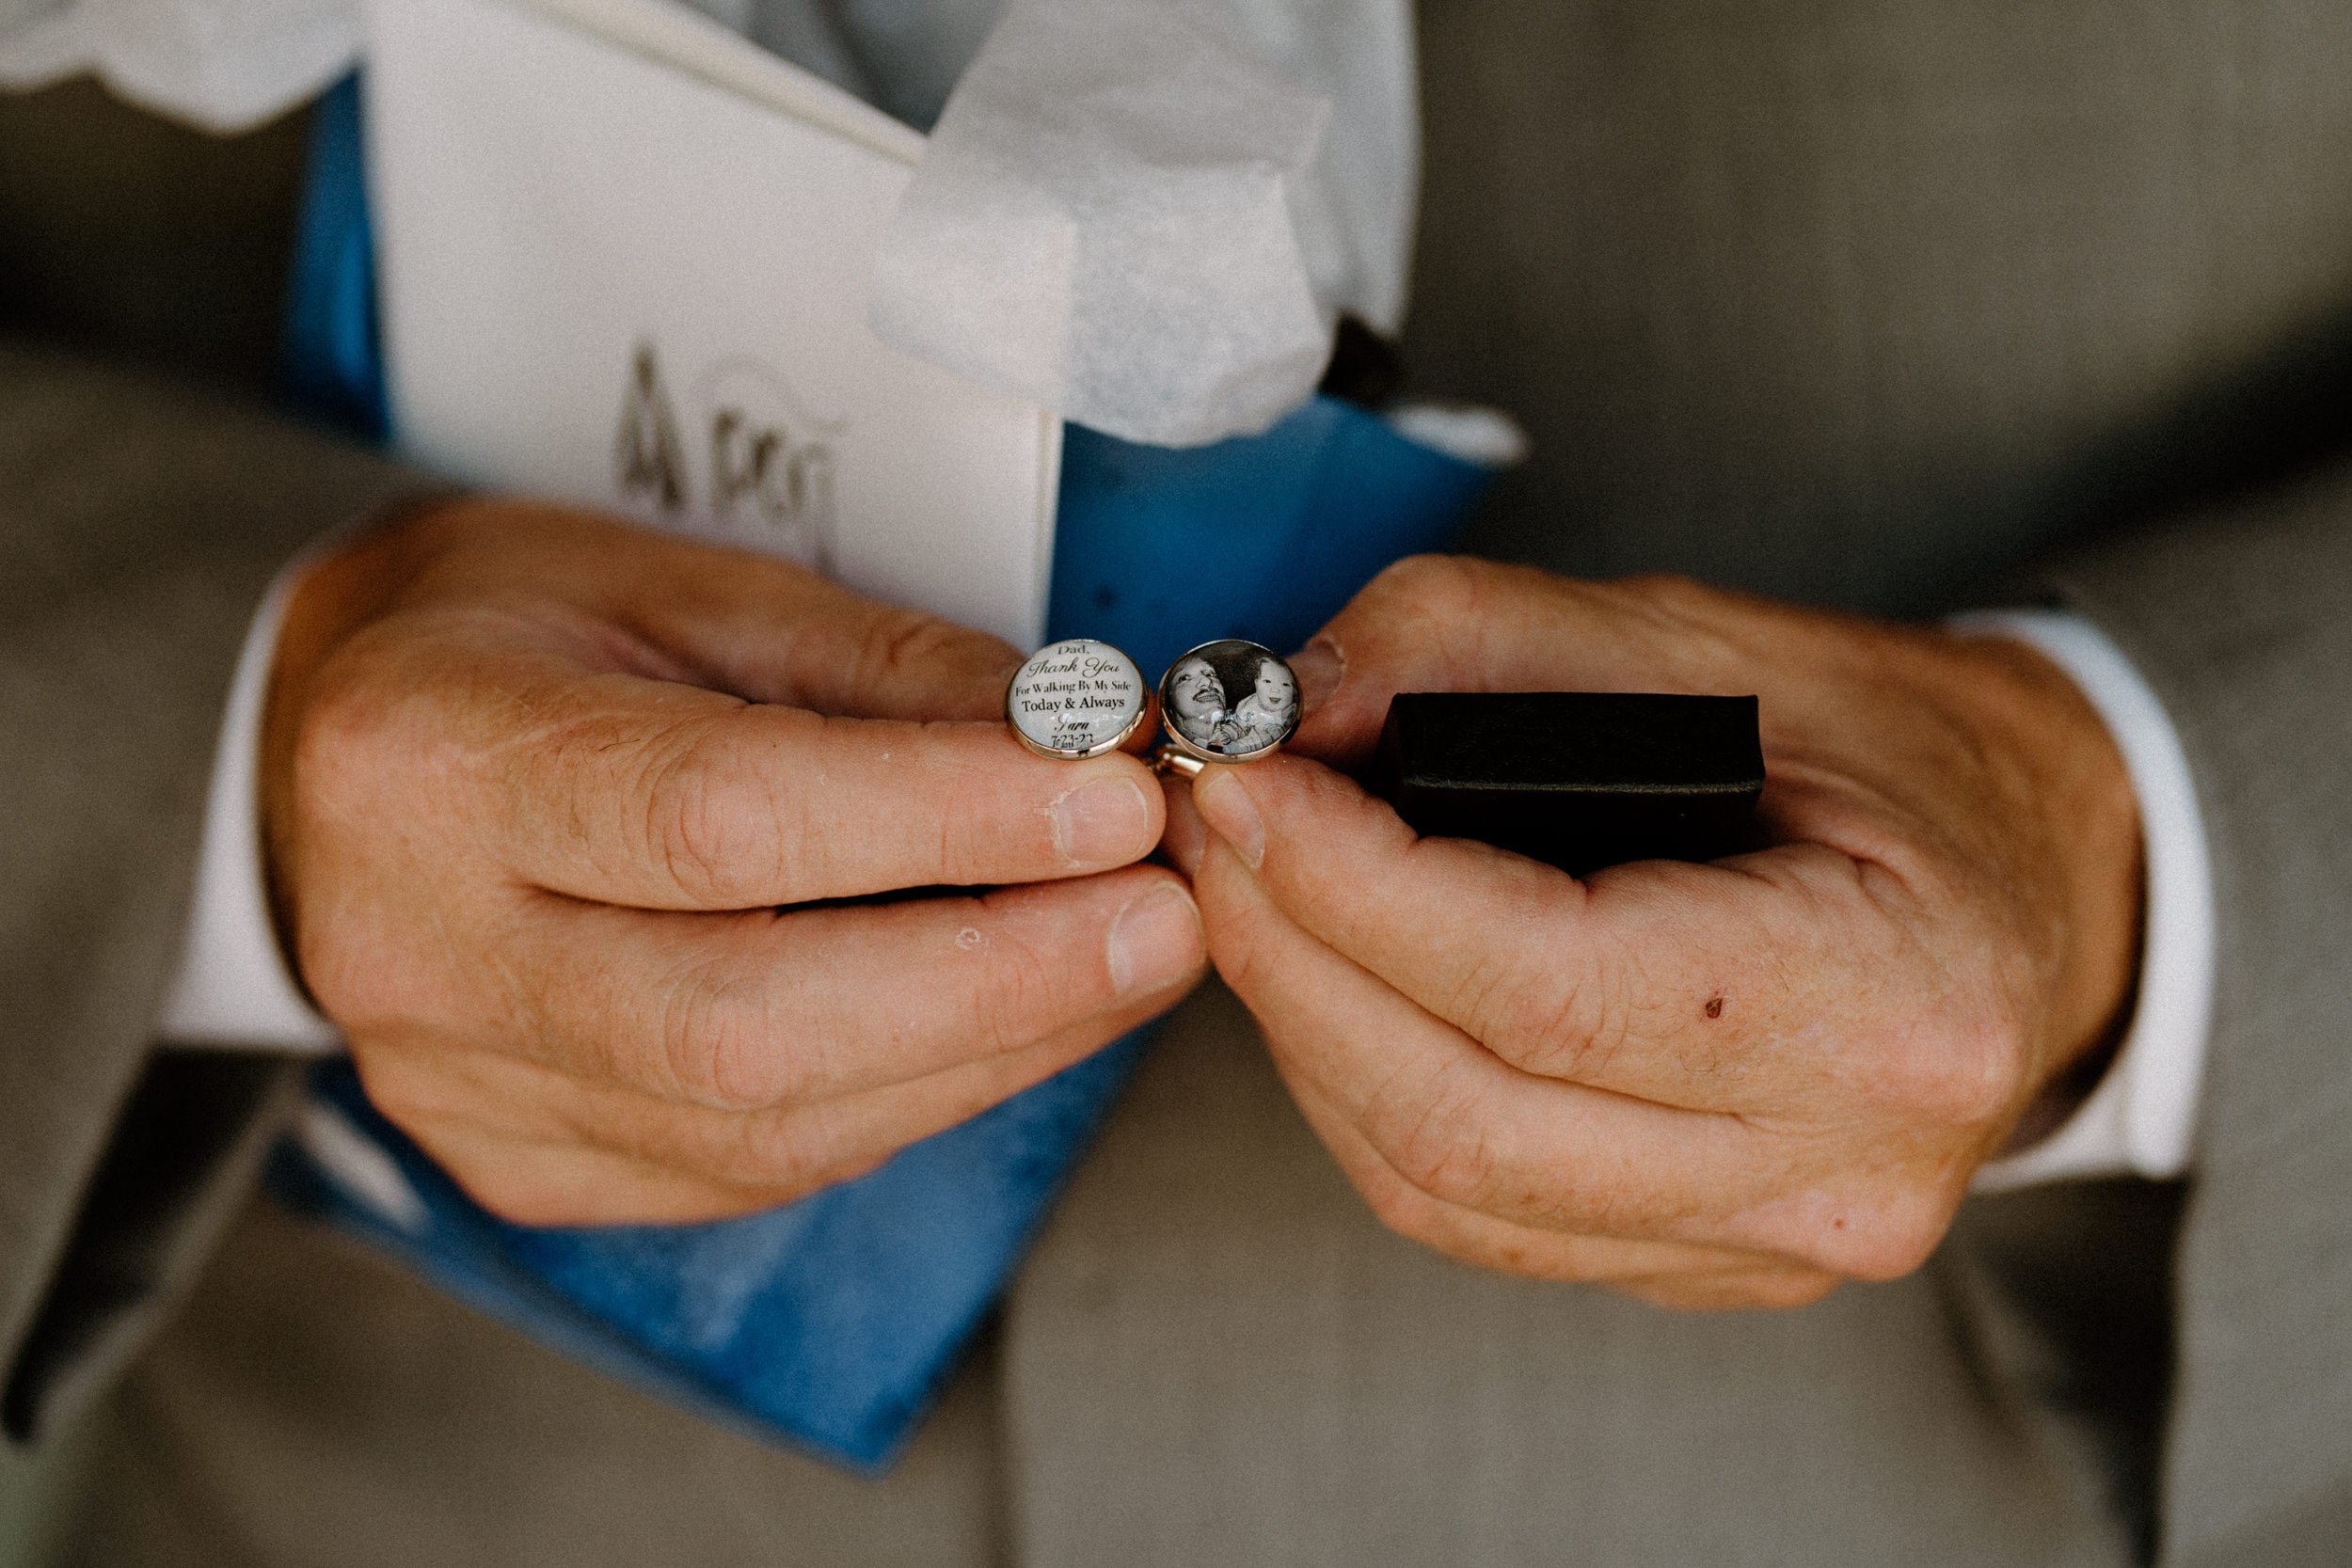 Father shows off cufflinks with a photo and inscription